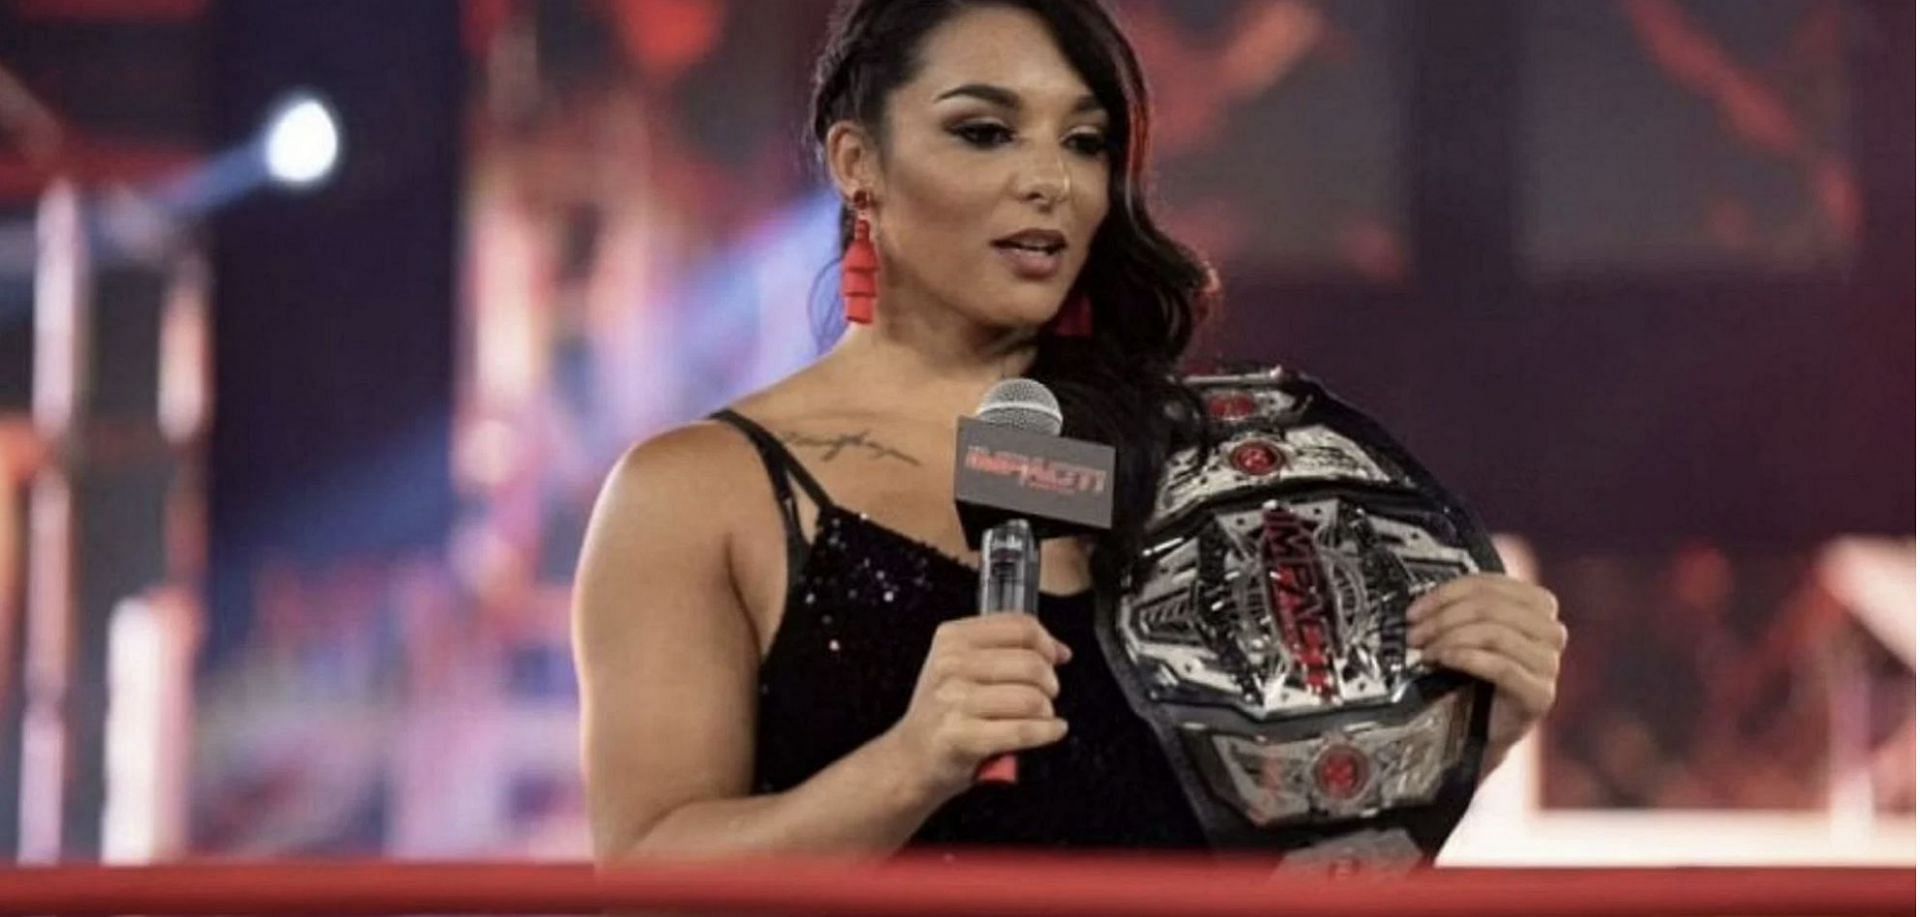 Deonna Purrazzo is a two-time Knockouts World Champion.